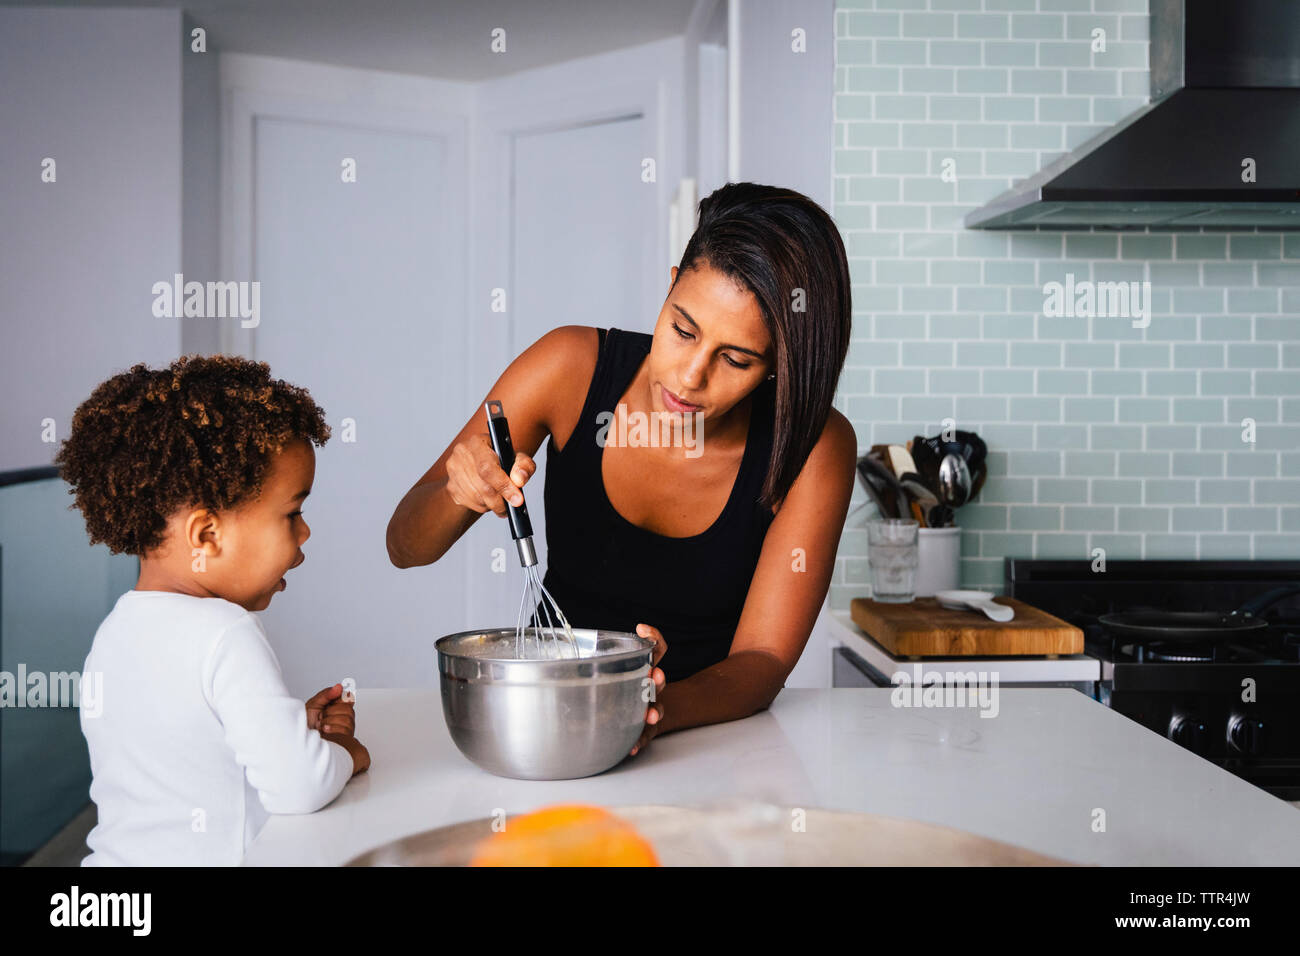 Son looking at mother preparing food on kitchen island Stock Photo